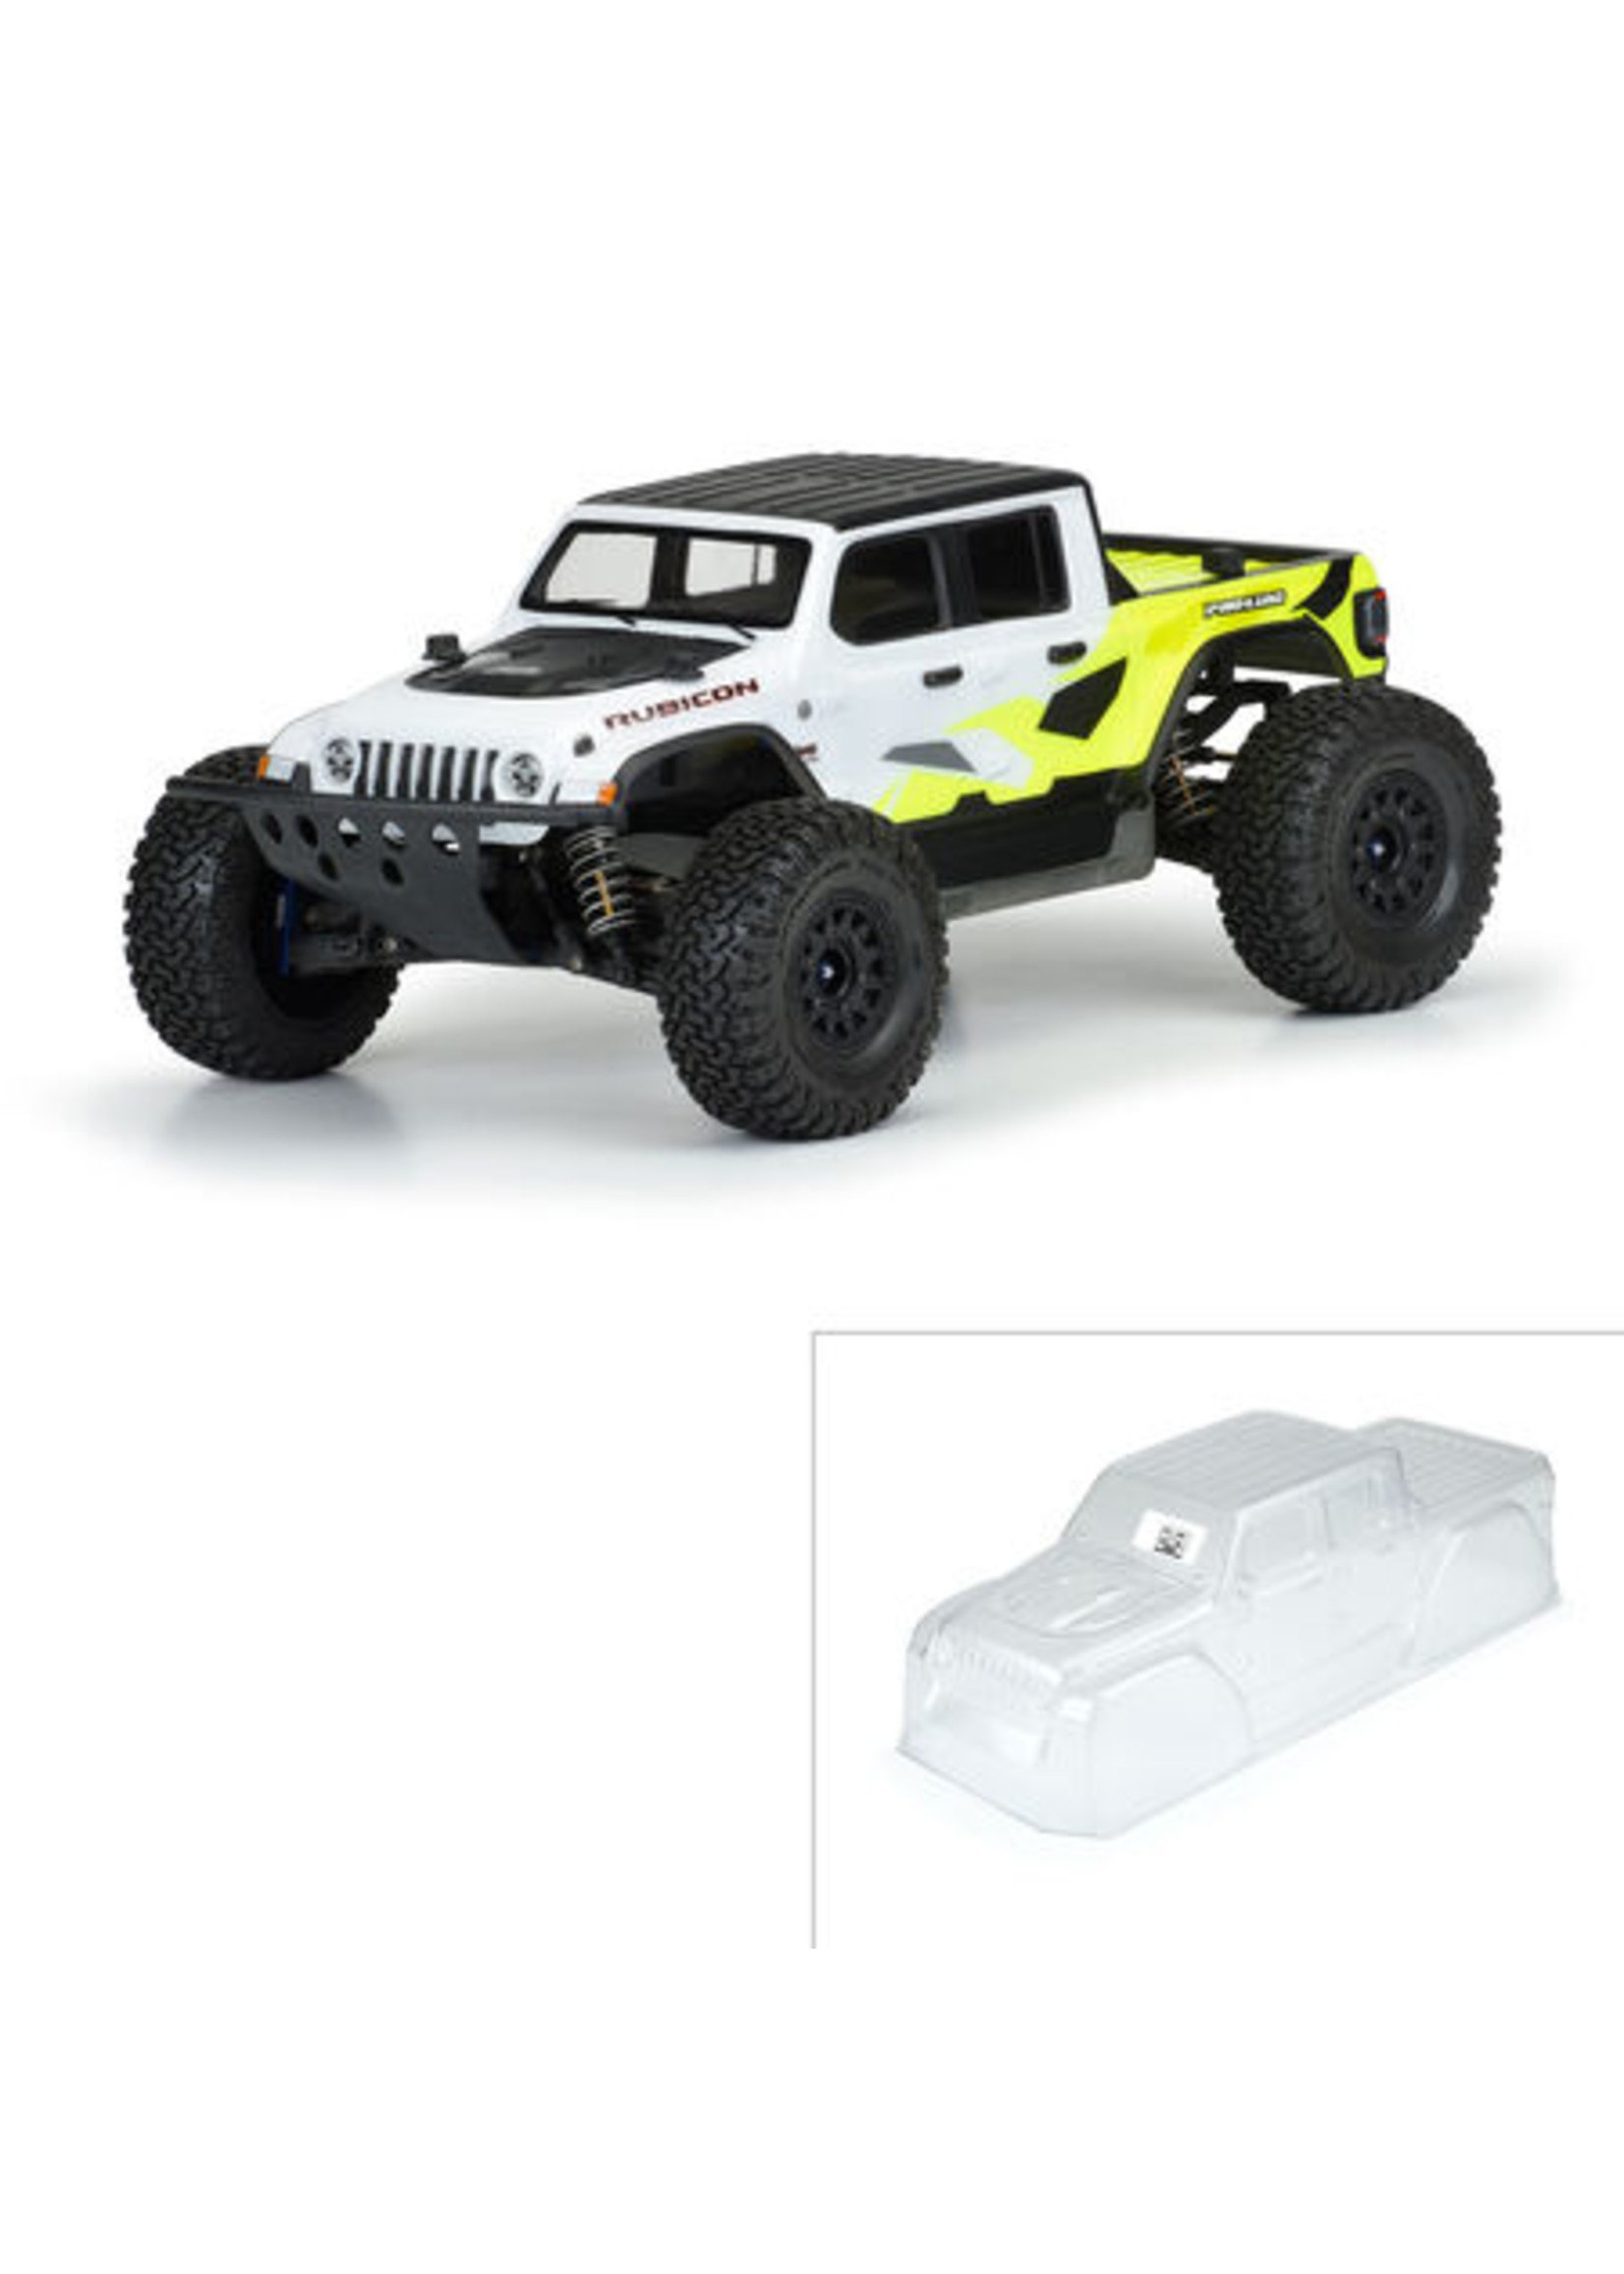 Pro-Line Racing PRO354200 Pro-Line Jeep Gladiator Rubicon Clear Body SC and 1:8 MT